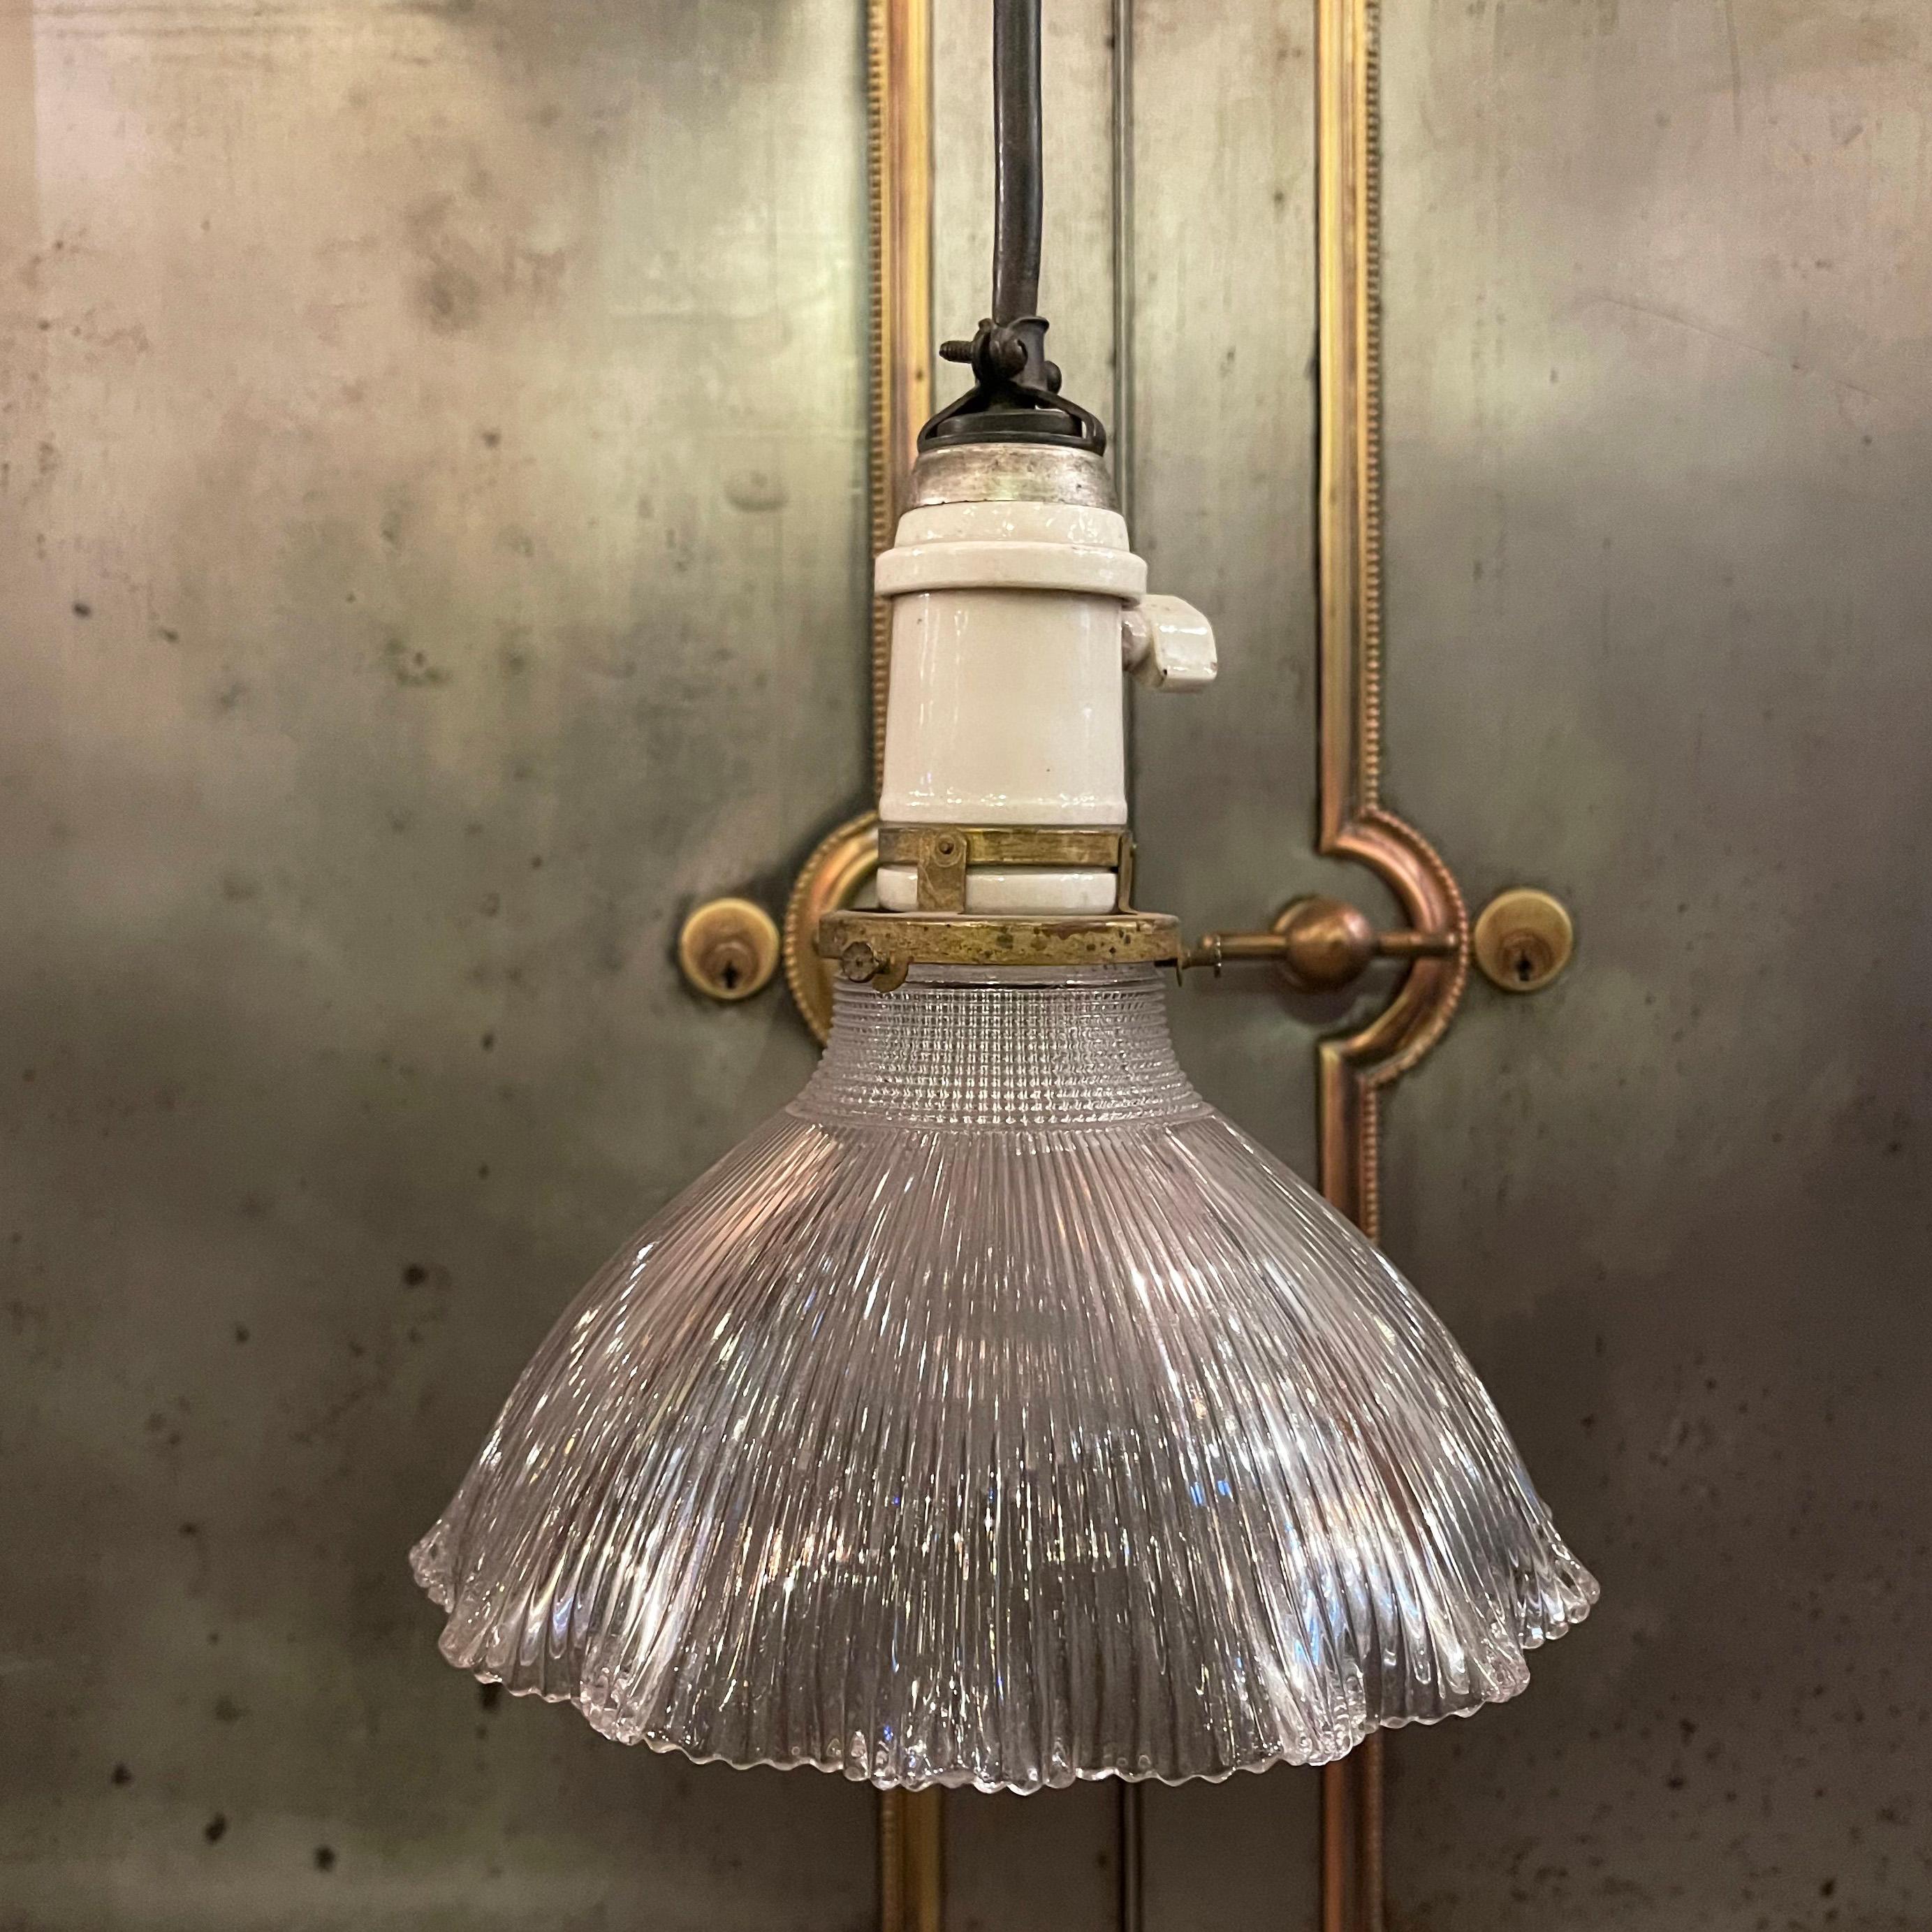 Early 20th century, industrial pendant light with ruffle edged, prismatic Holophane glass dome shade, brass fitter, porcelain socket and canopy on metal backplate hangs at an overall height of 20 inches. 